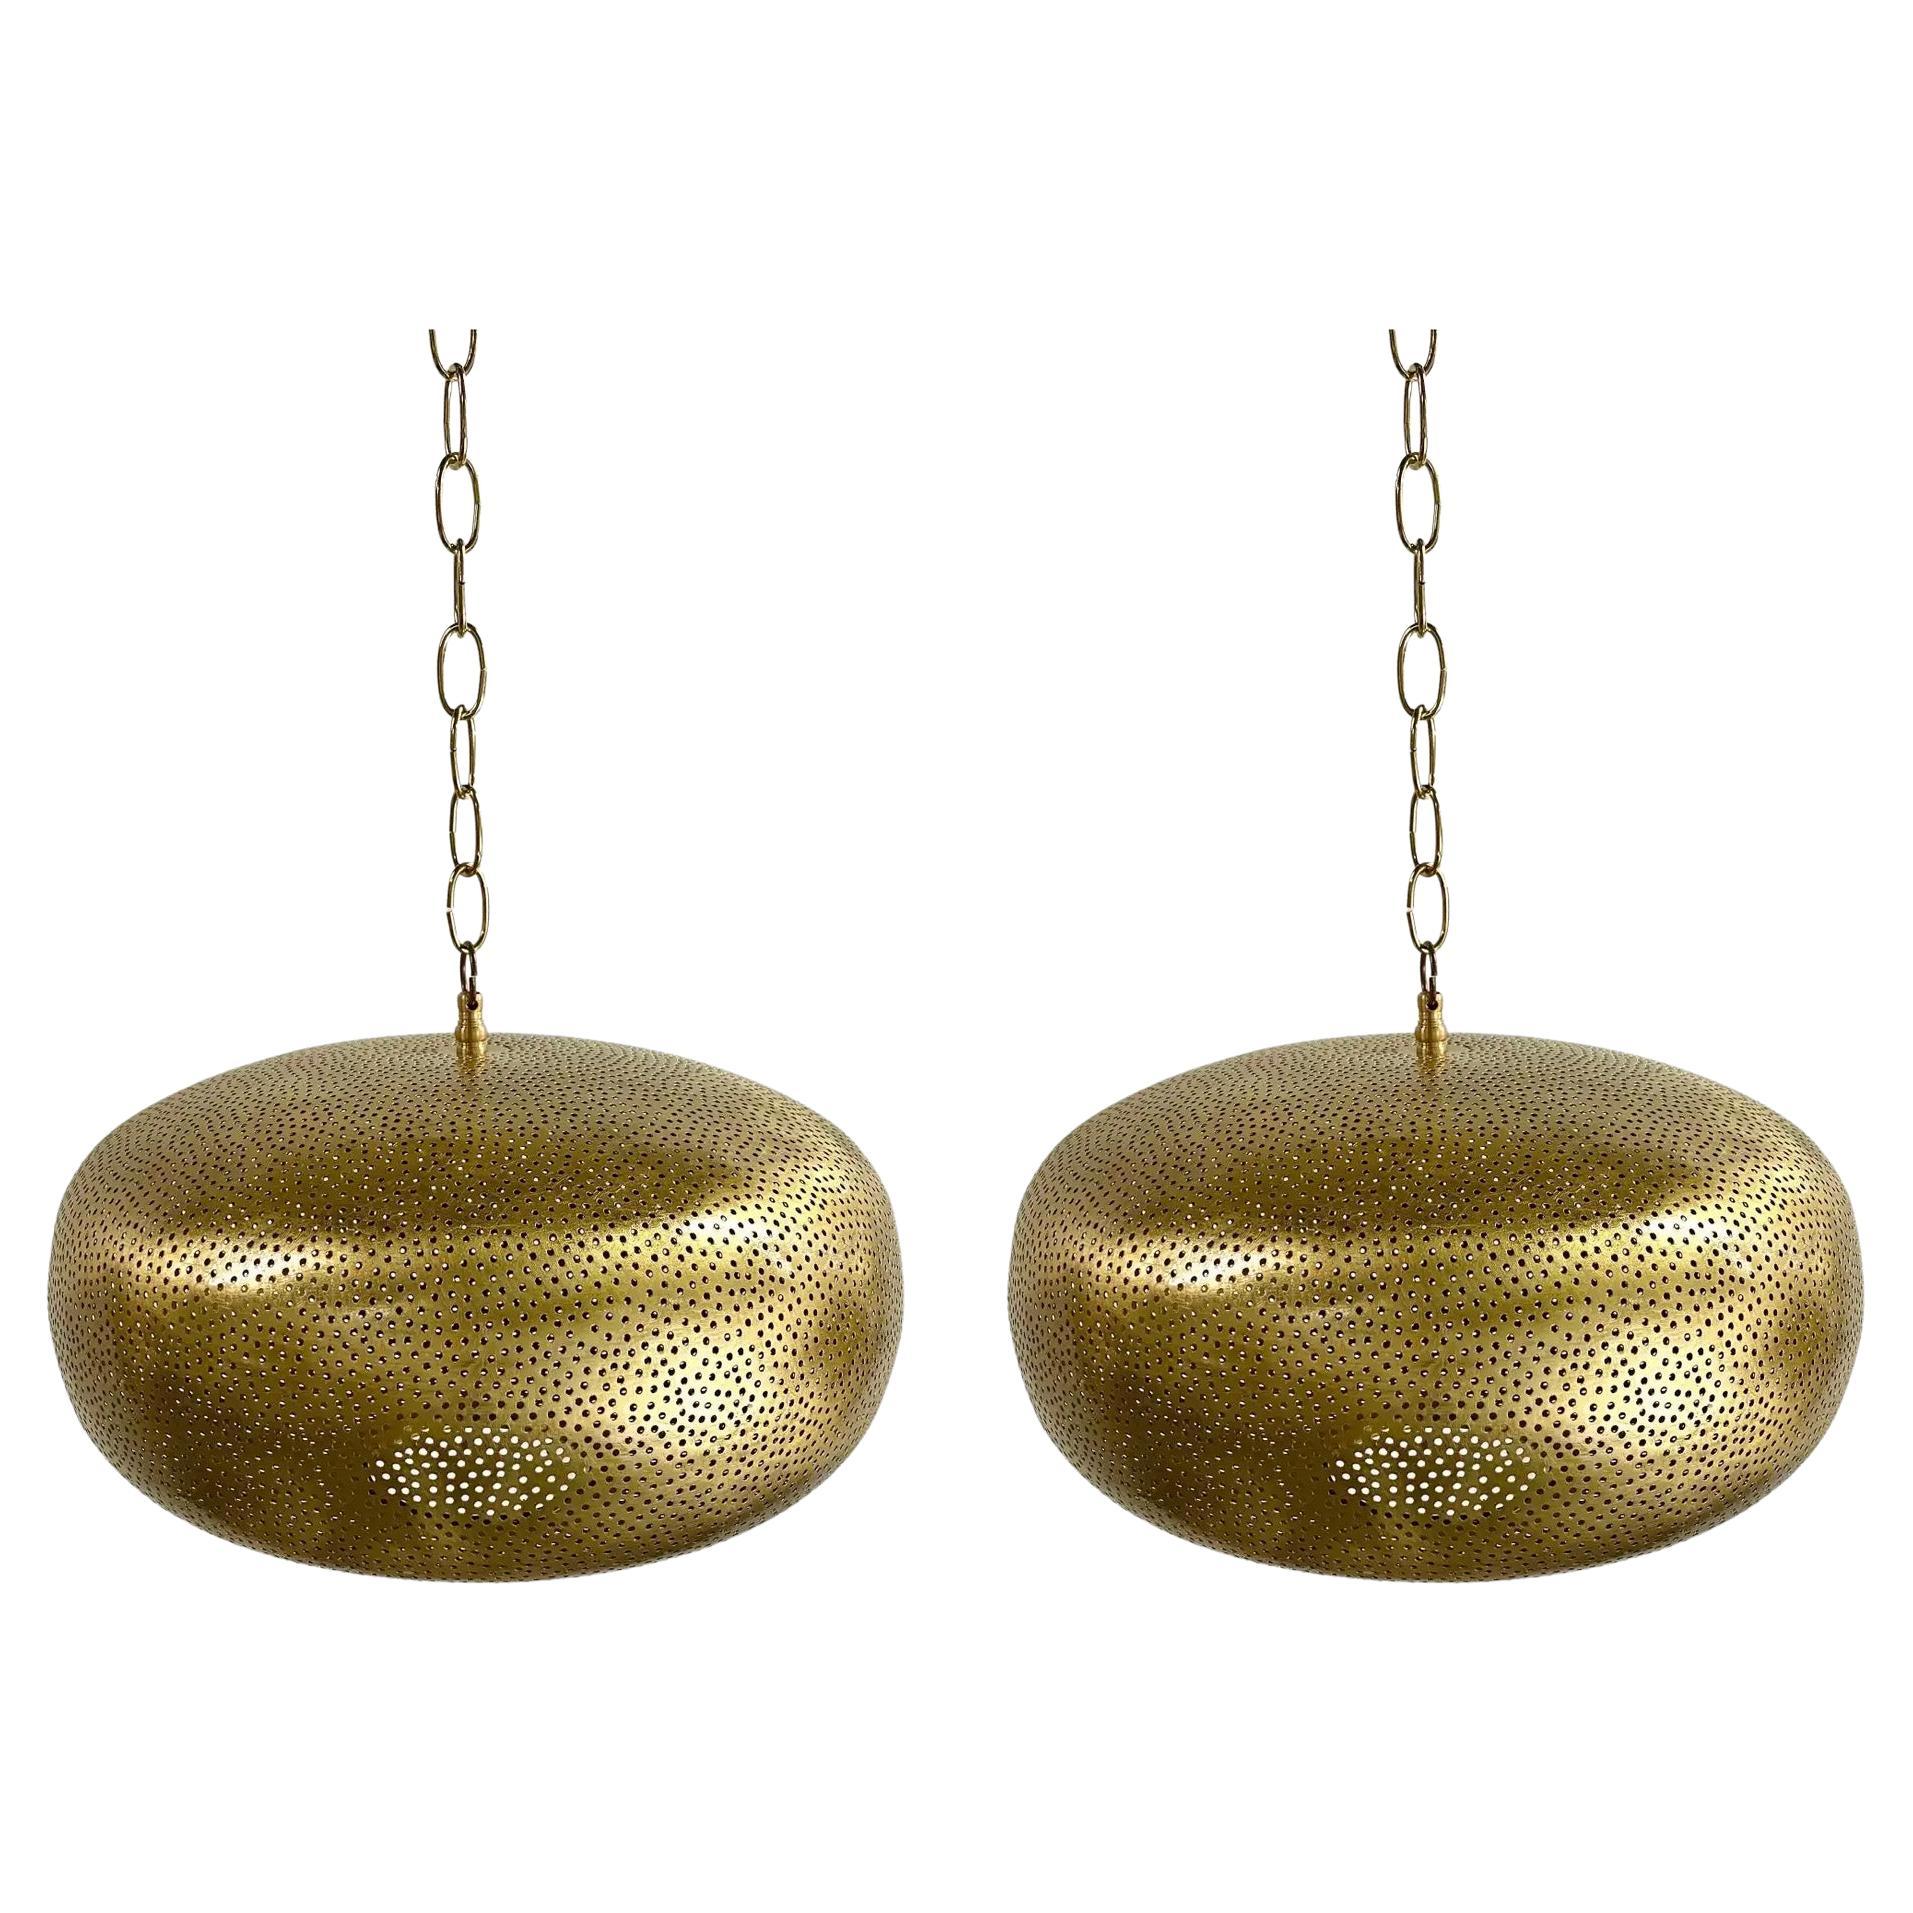 Boho Chic Style Oval Brass Pendant or Lantern, a Pair 